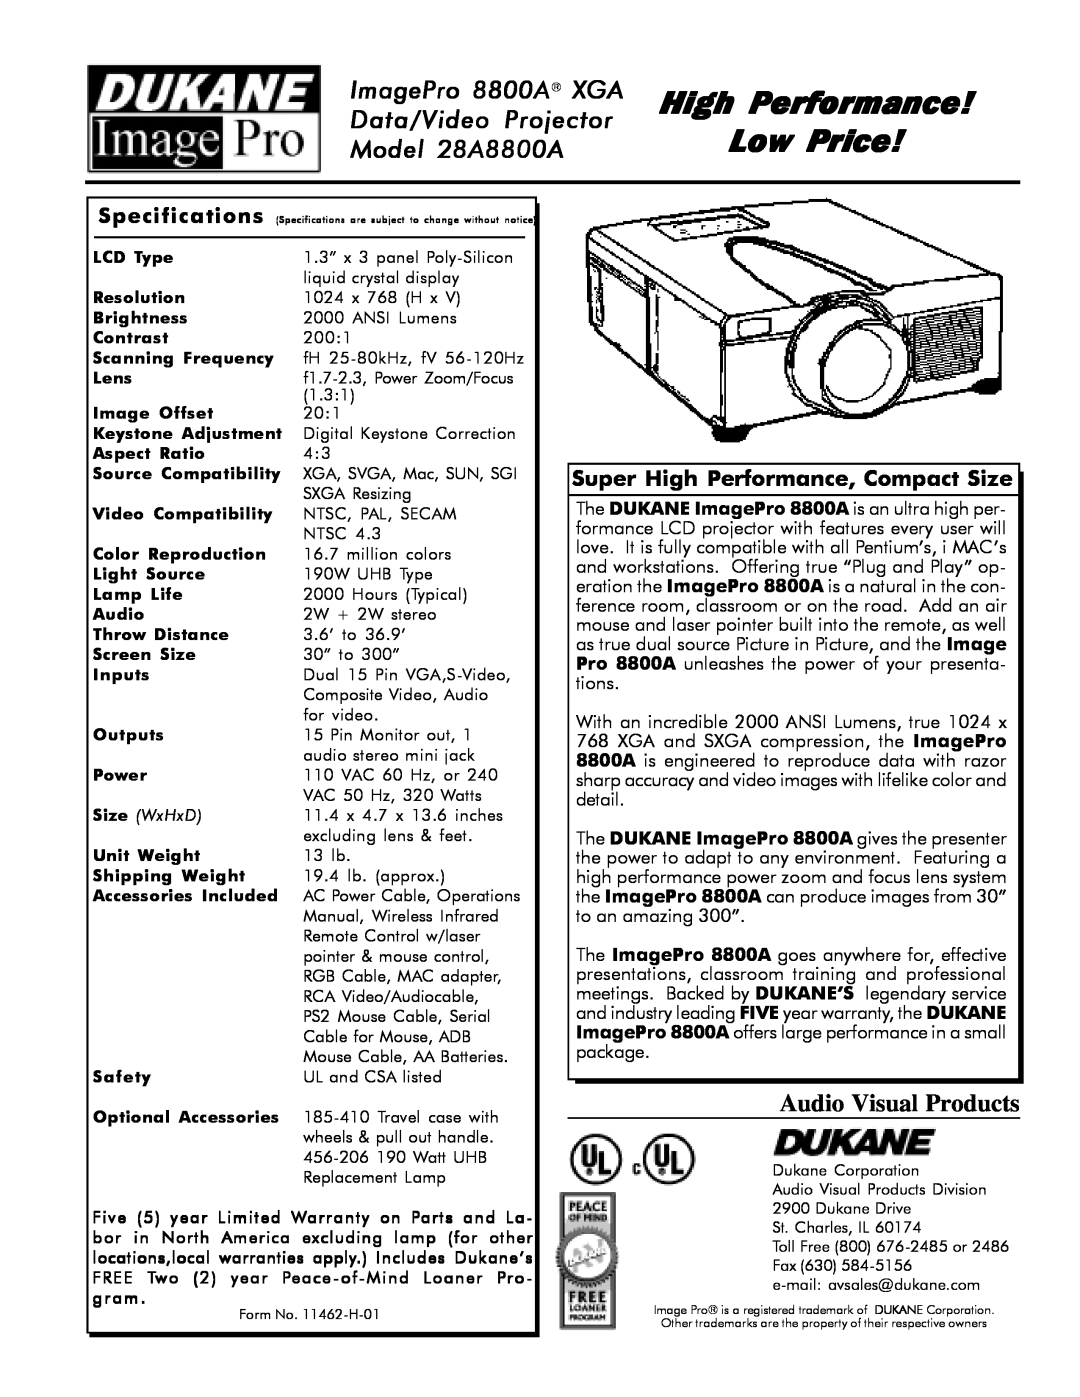 Dukane High Performance Low Price, ImagePro 8800A XGA Data/Video Projector Model 28A8800A, Audio Visual Products 